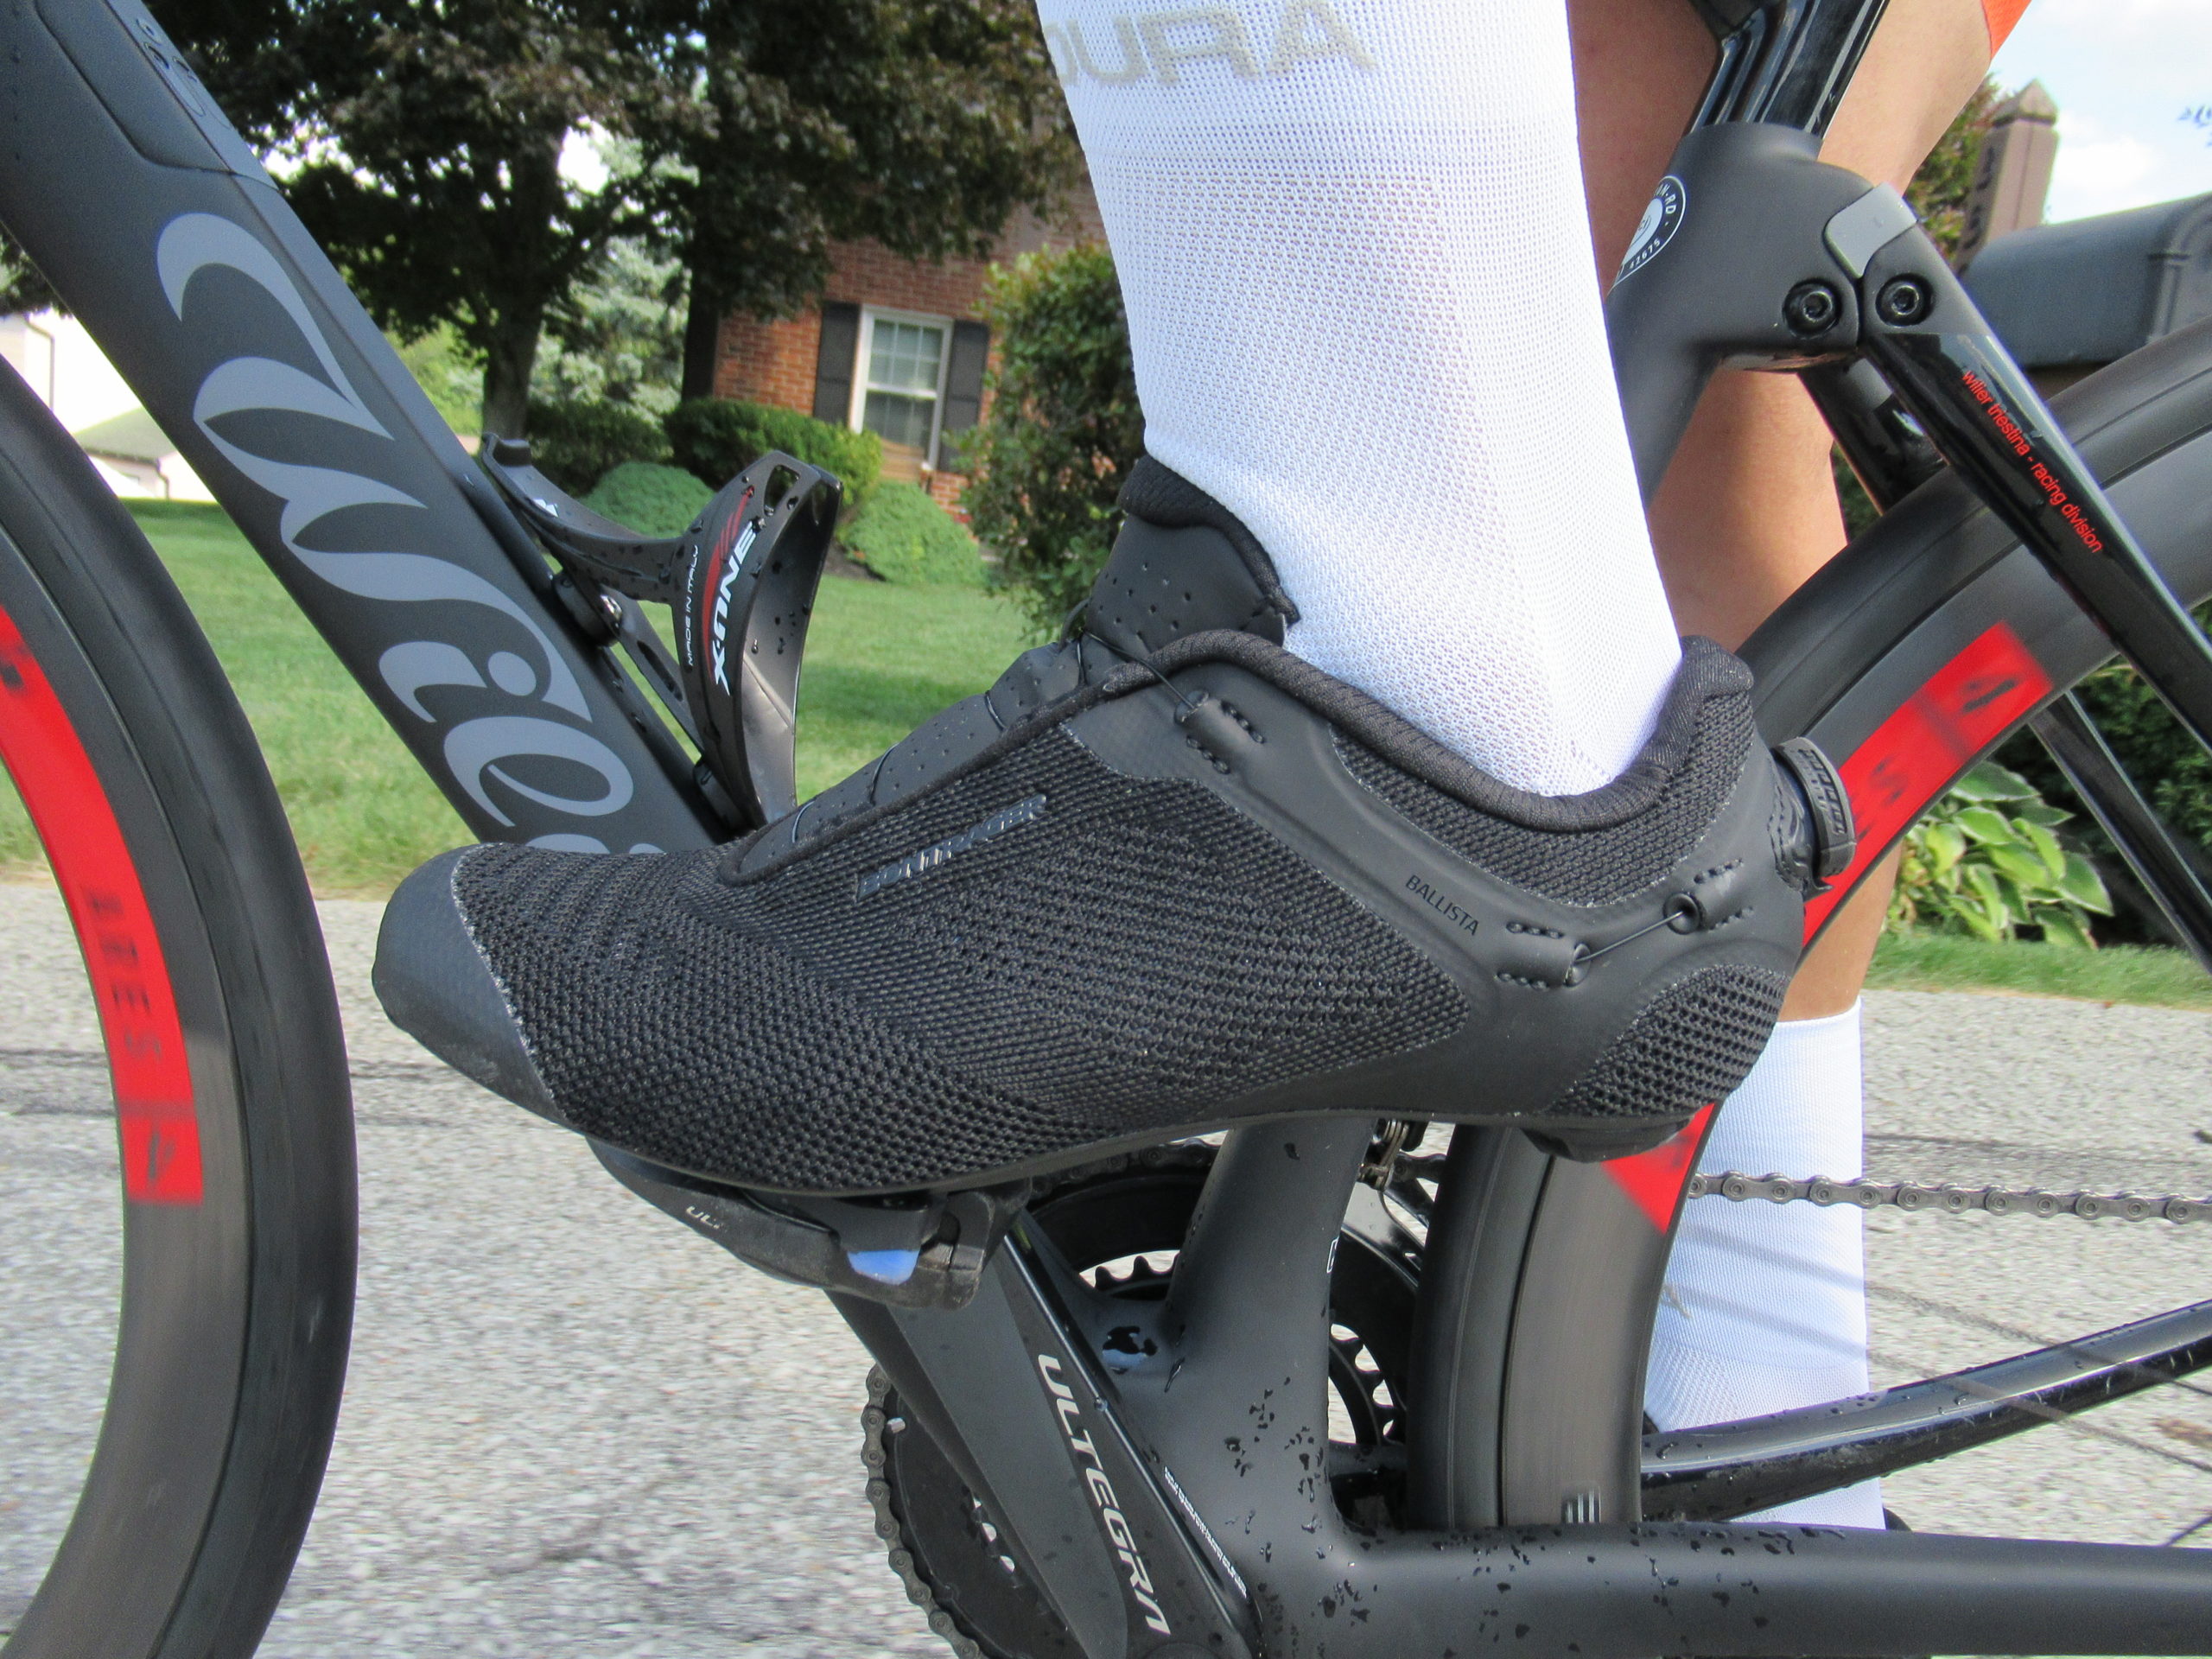 Review: Ballista Knit road cycling beat the heat with a secure fit - Bikerumor